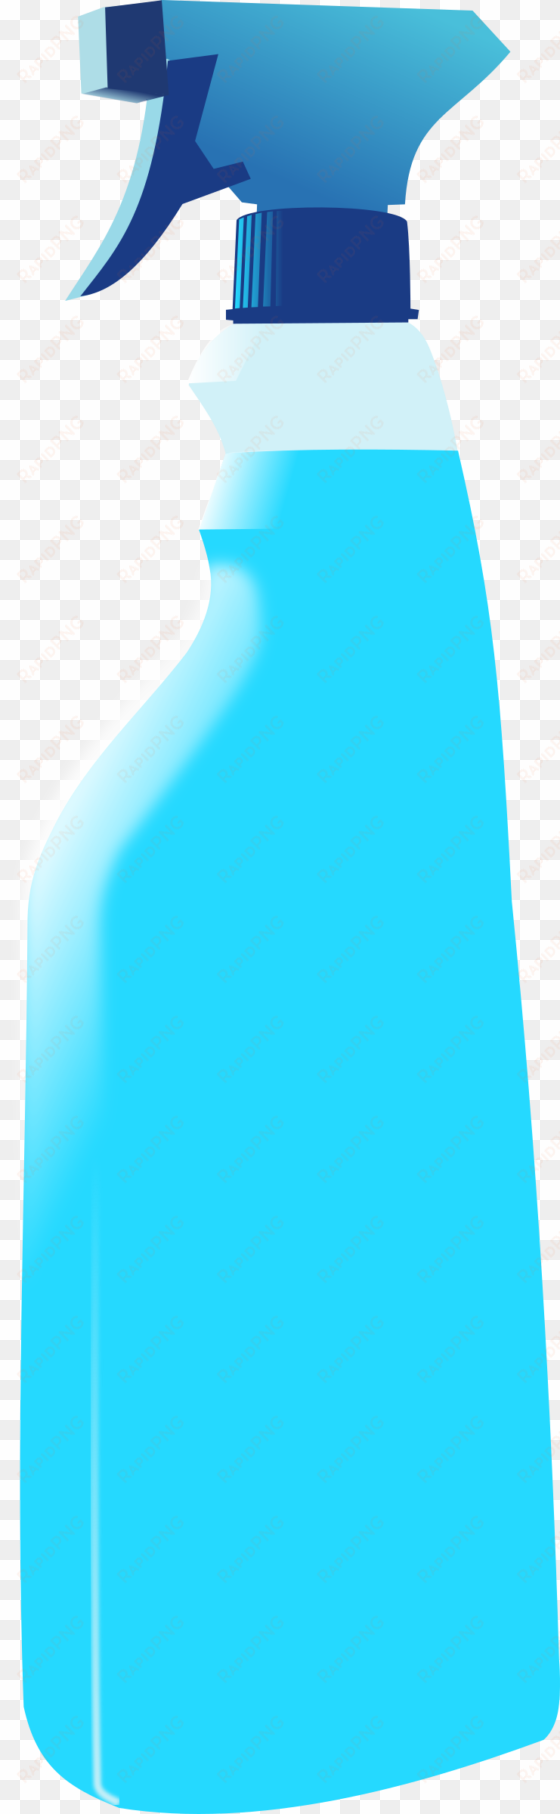 this free icons png design of squirt bottle 2